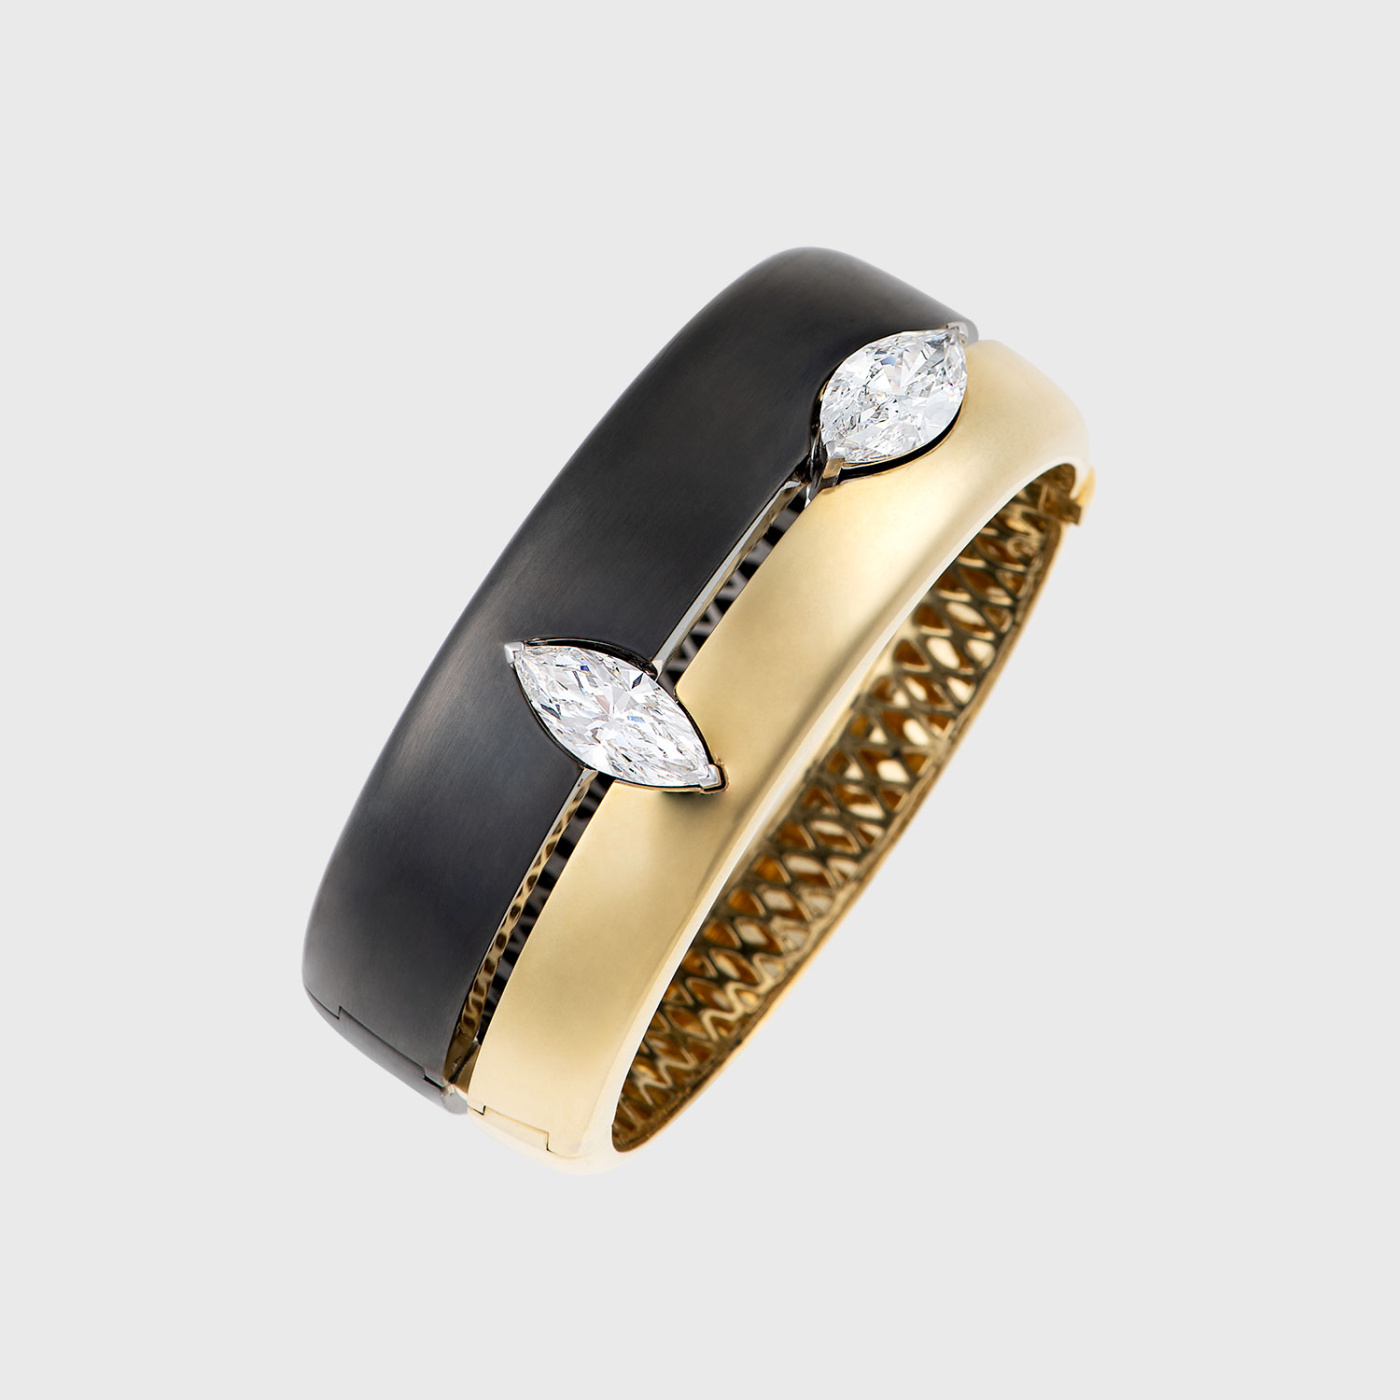 Yellow and blackened white gold cuff bracelet with marquise white diamonds